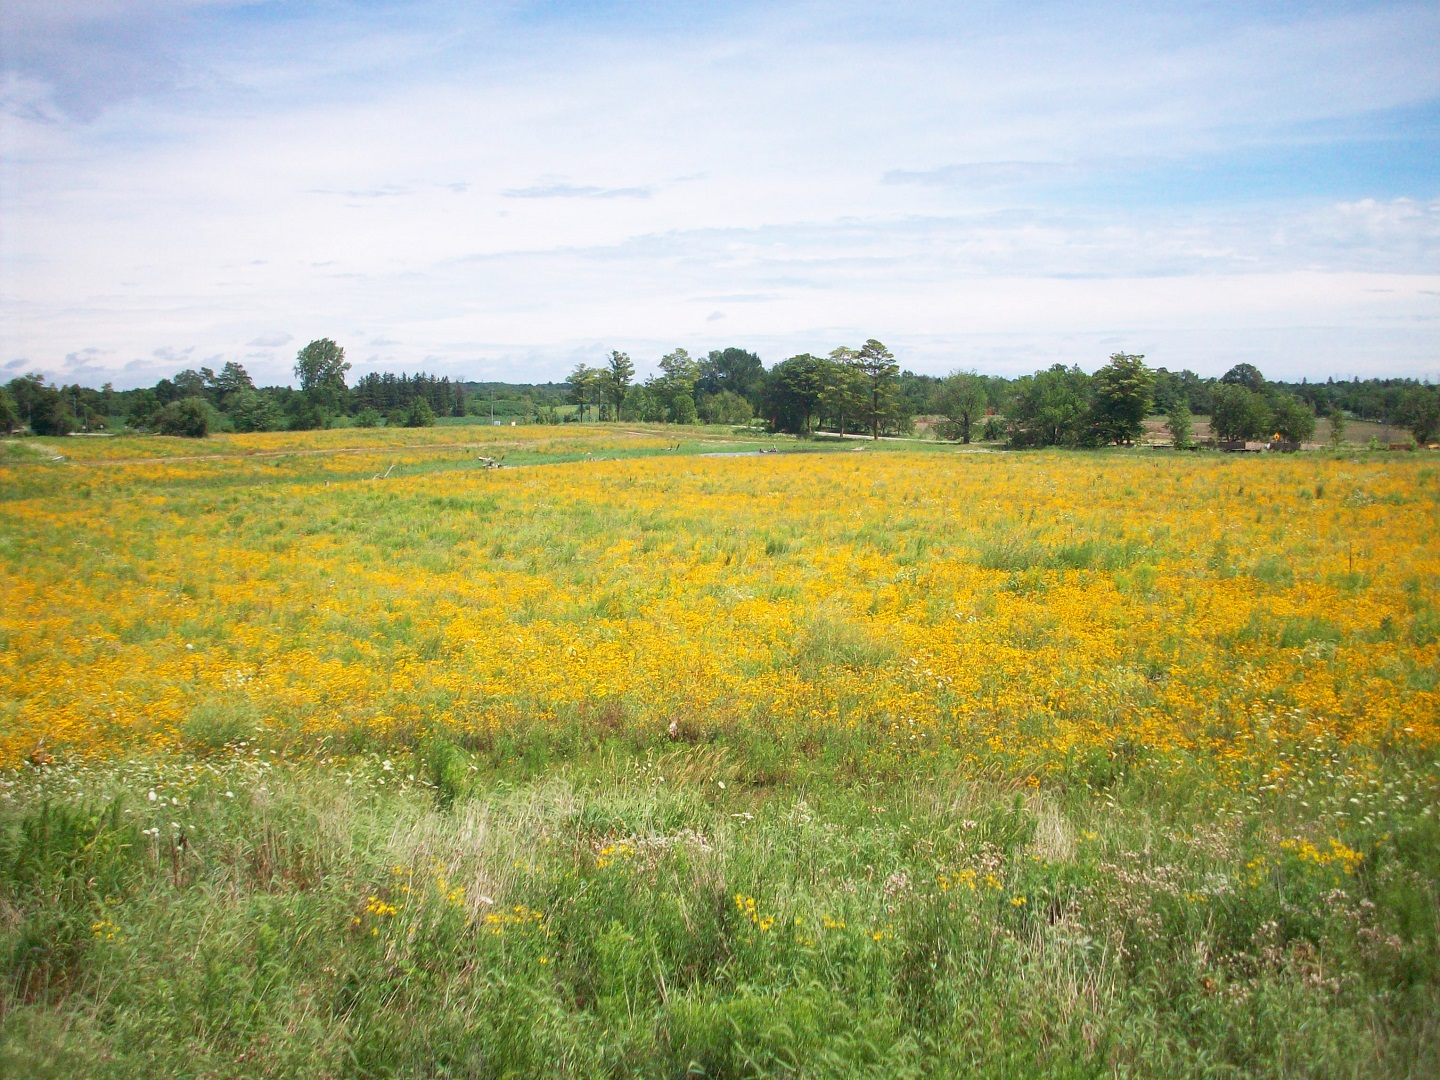 Rouge National Urban Park meadow restoration project seen in 2012 with meadow fully established